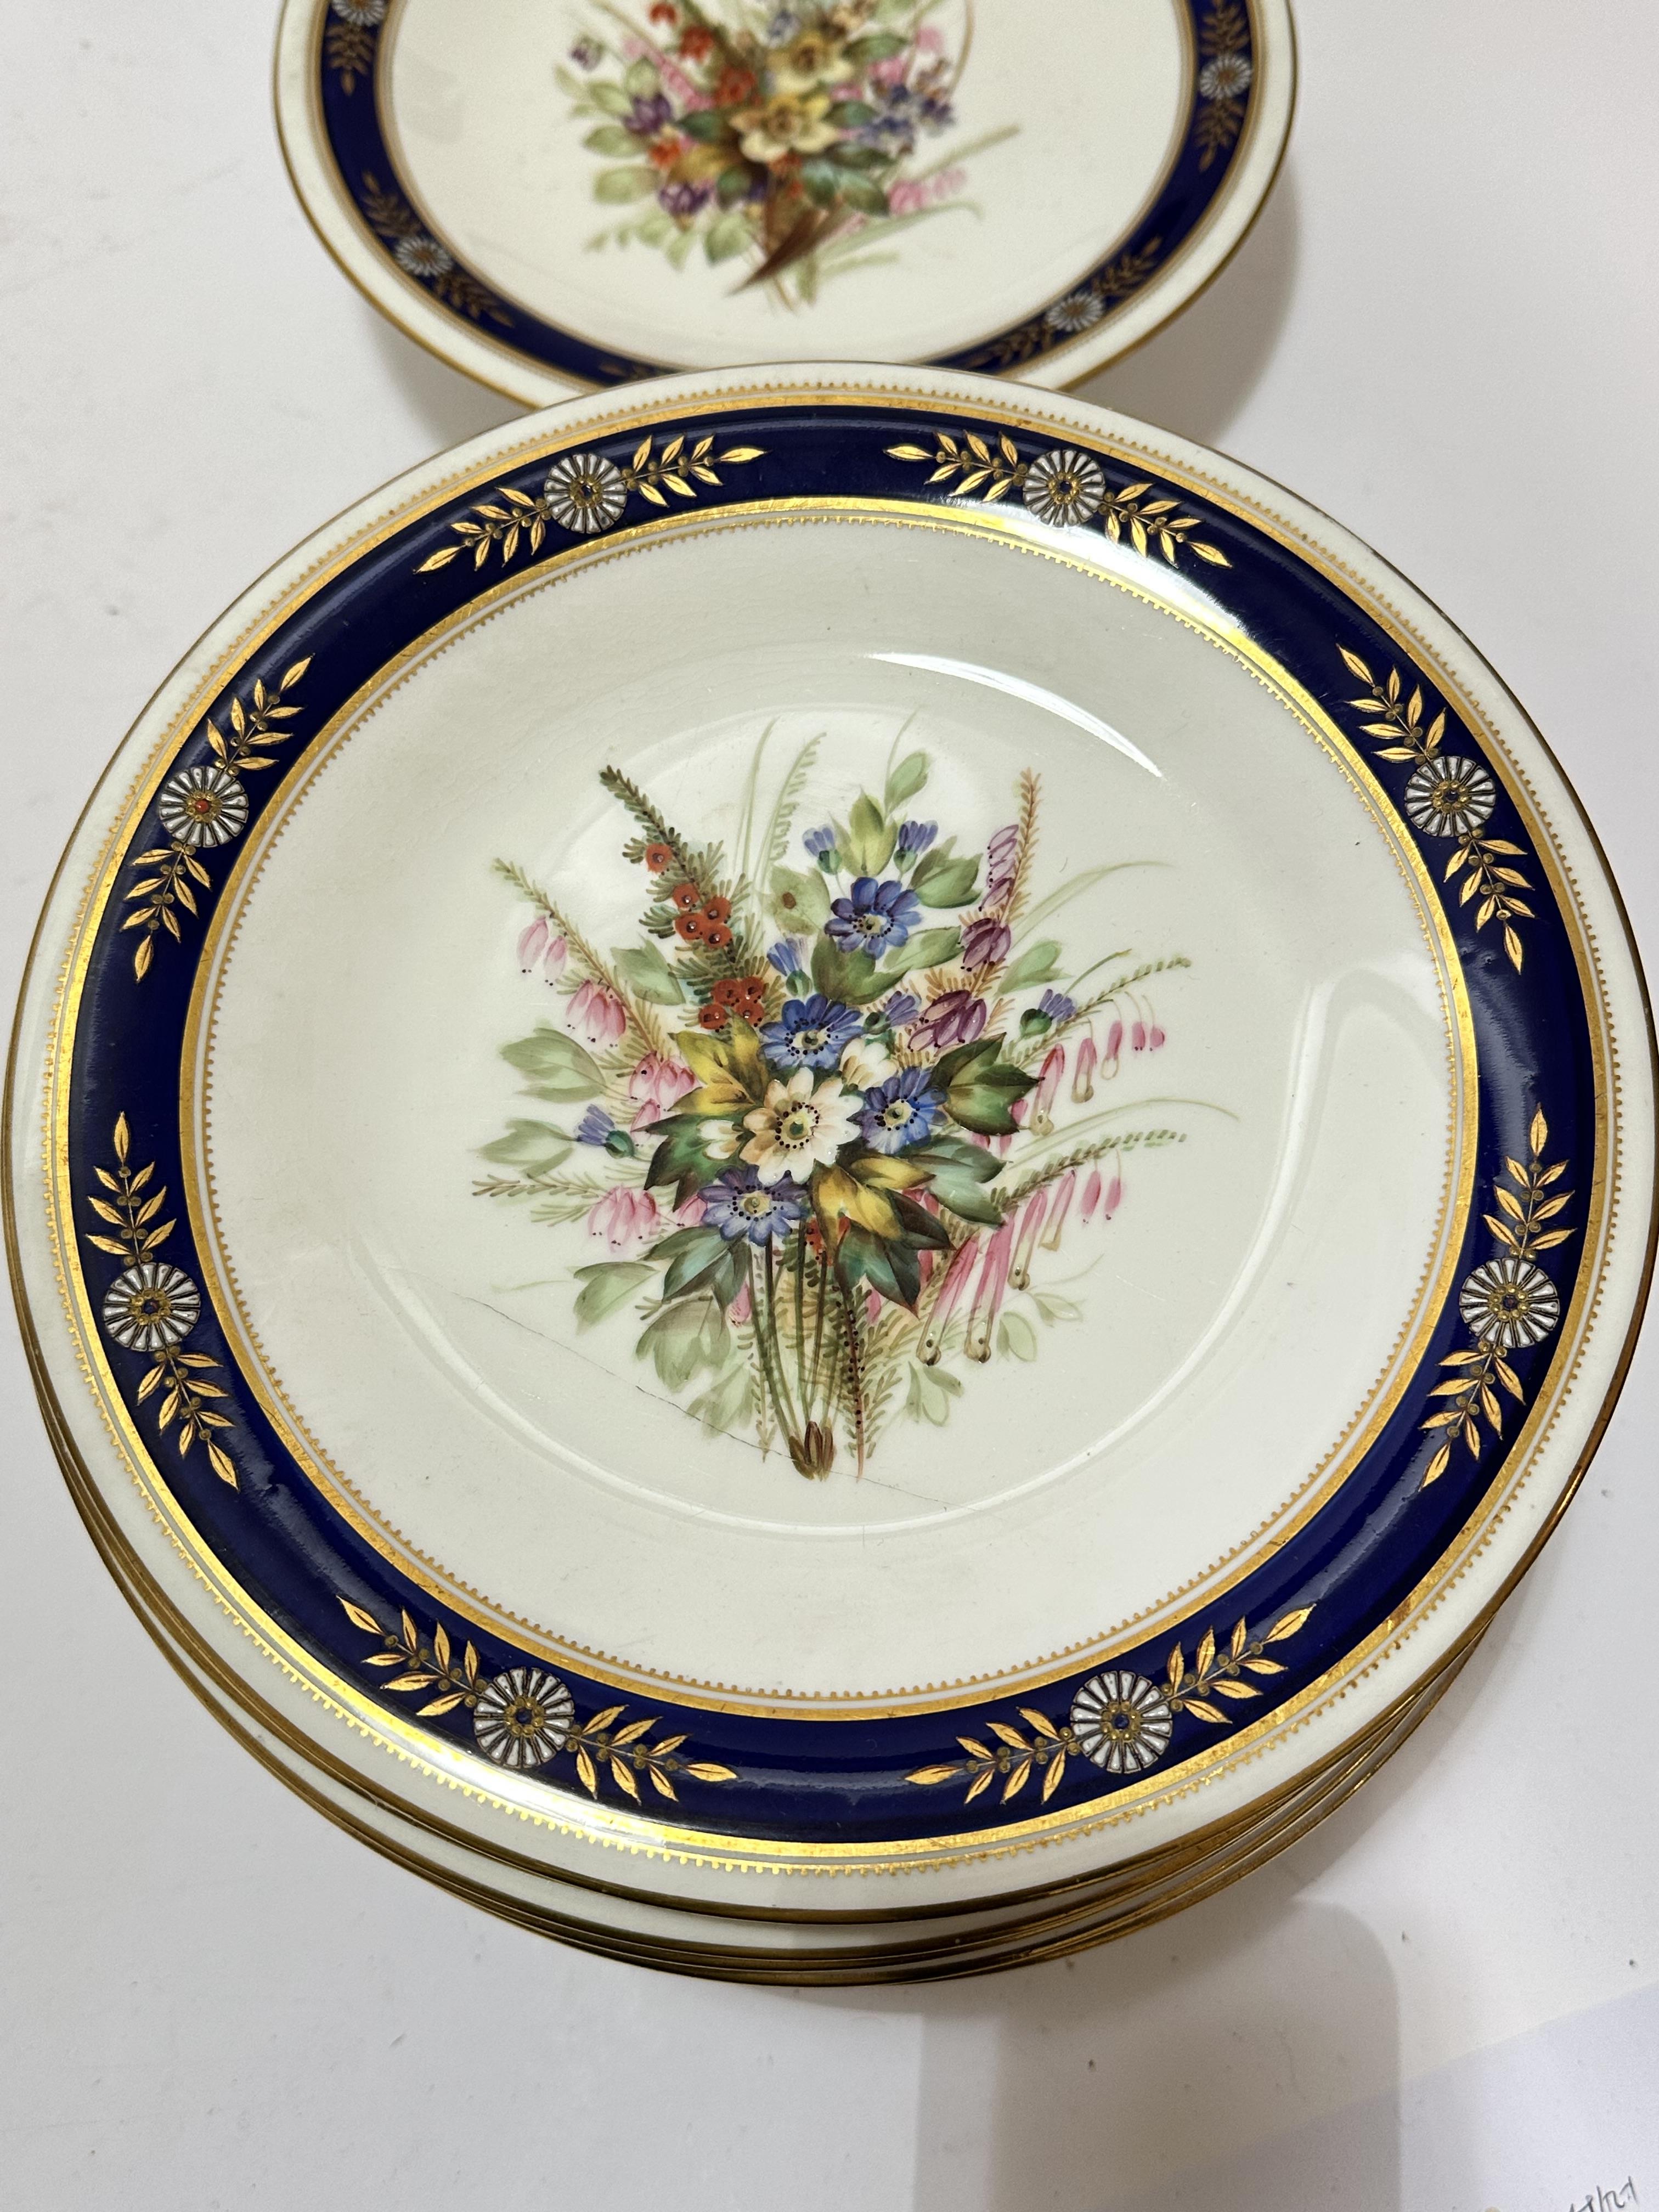 An Edwardian Royal Worcester nineteen piece dessert service including three stands, (5cm x 23cm) and - Image 18 of 29